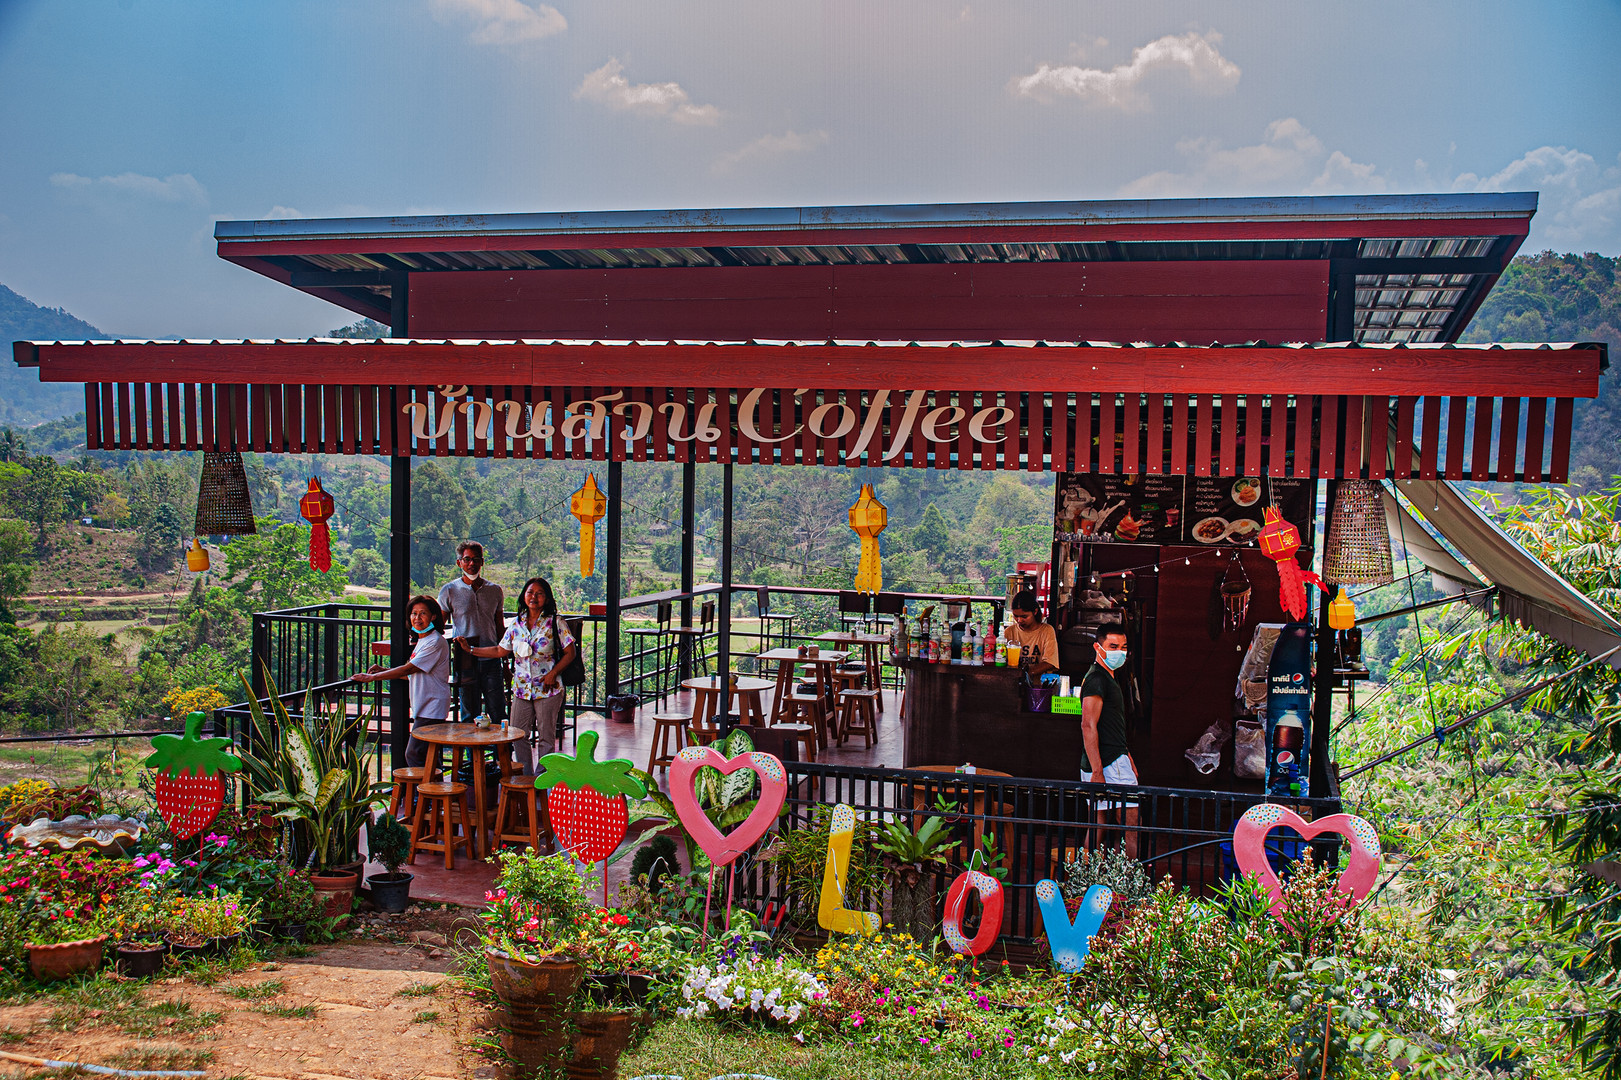 Coffee shop along the highway